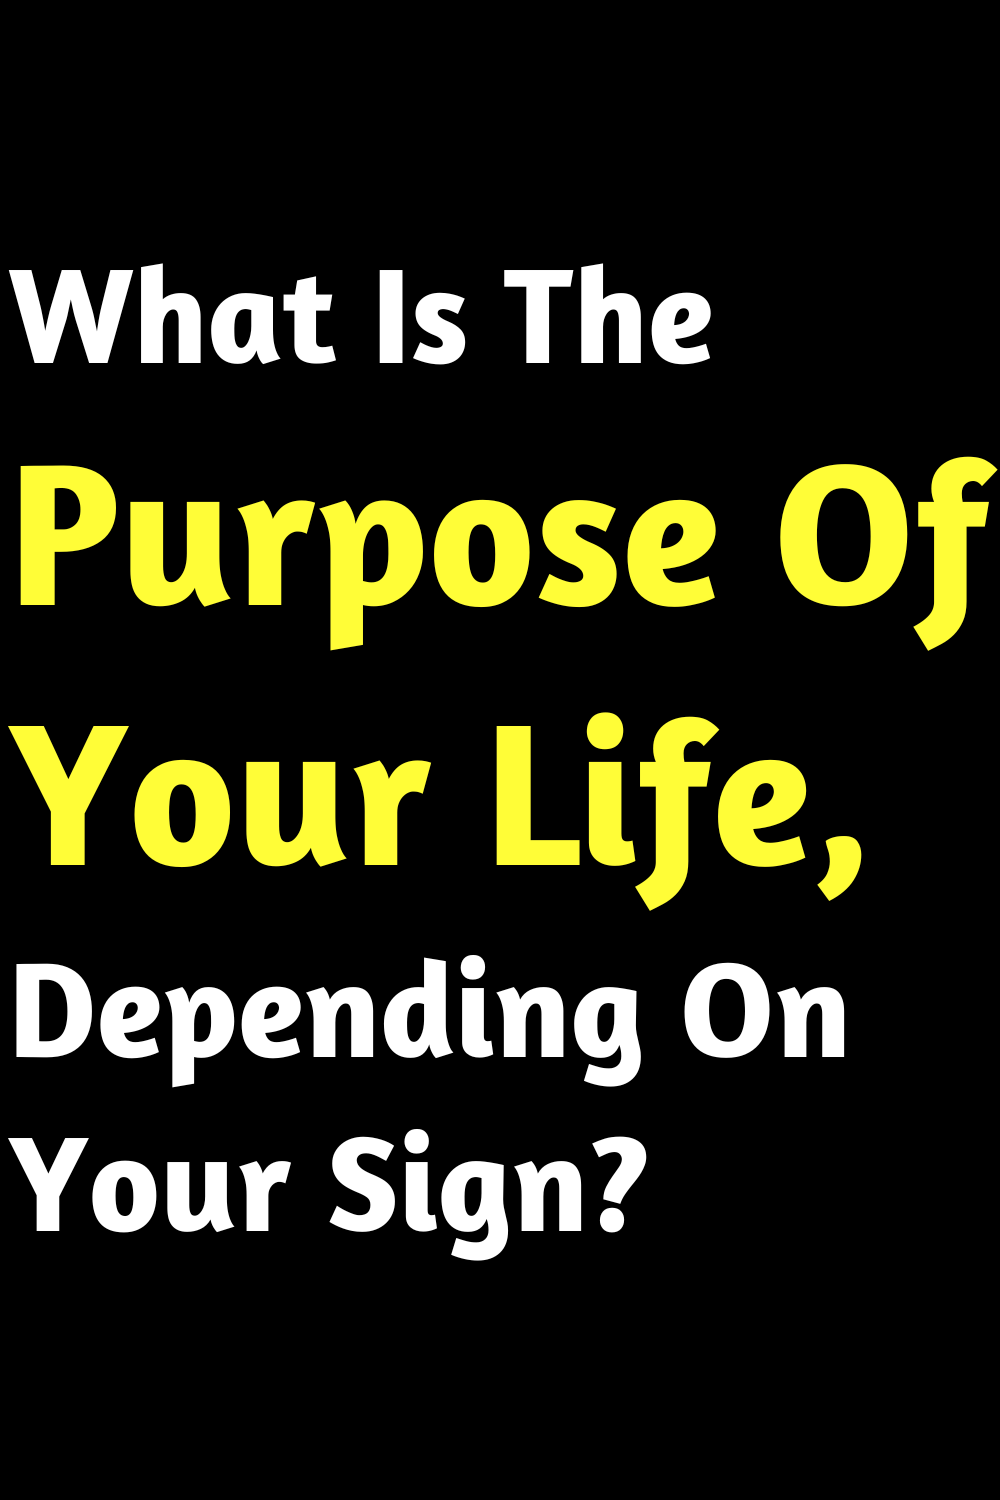 What Is The Purpose Of Your Life, Depending On Your Sign?